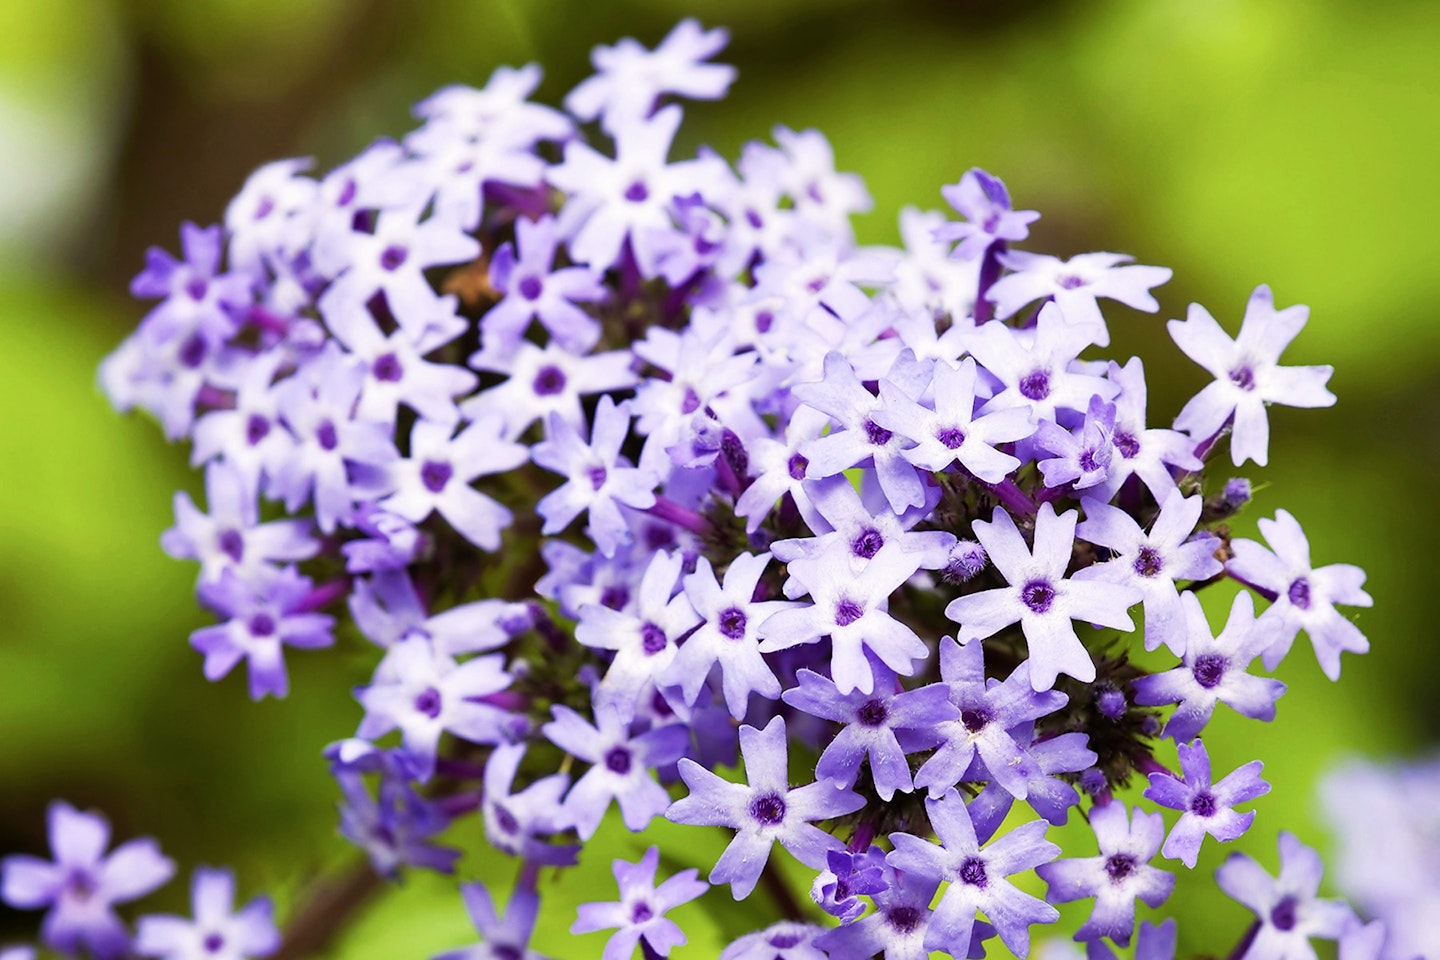 Verbena corymbosa is a great variety to try